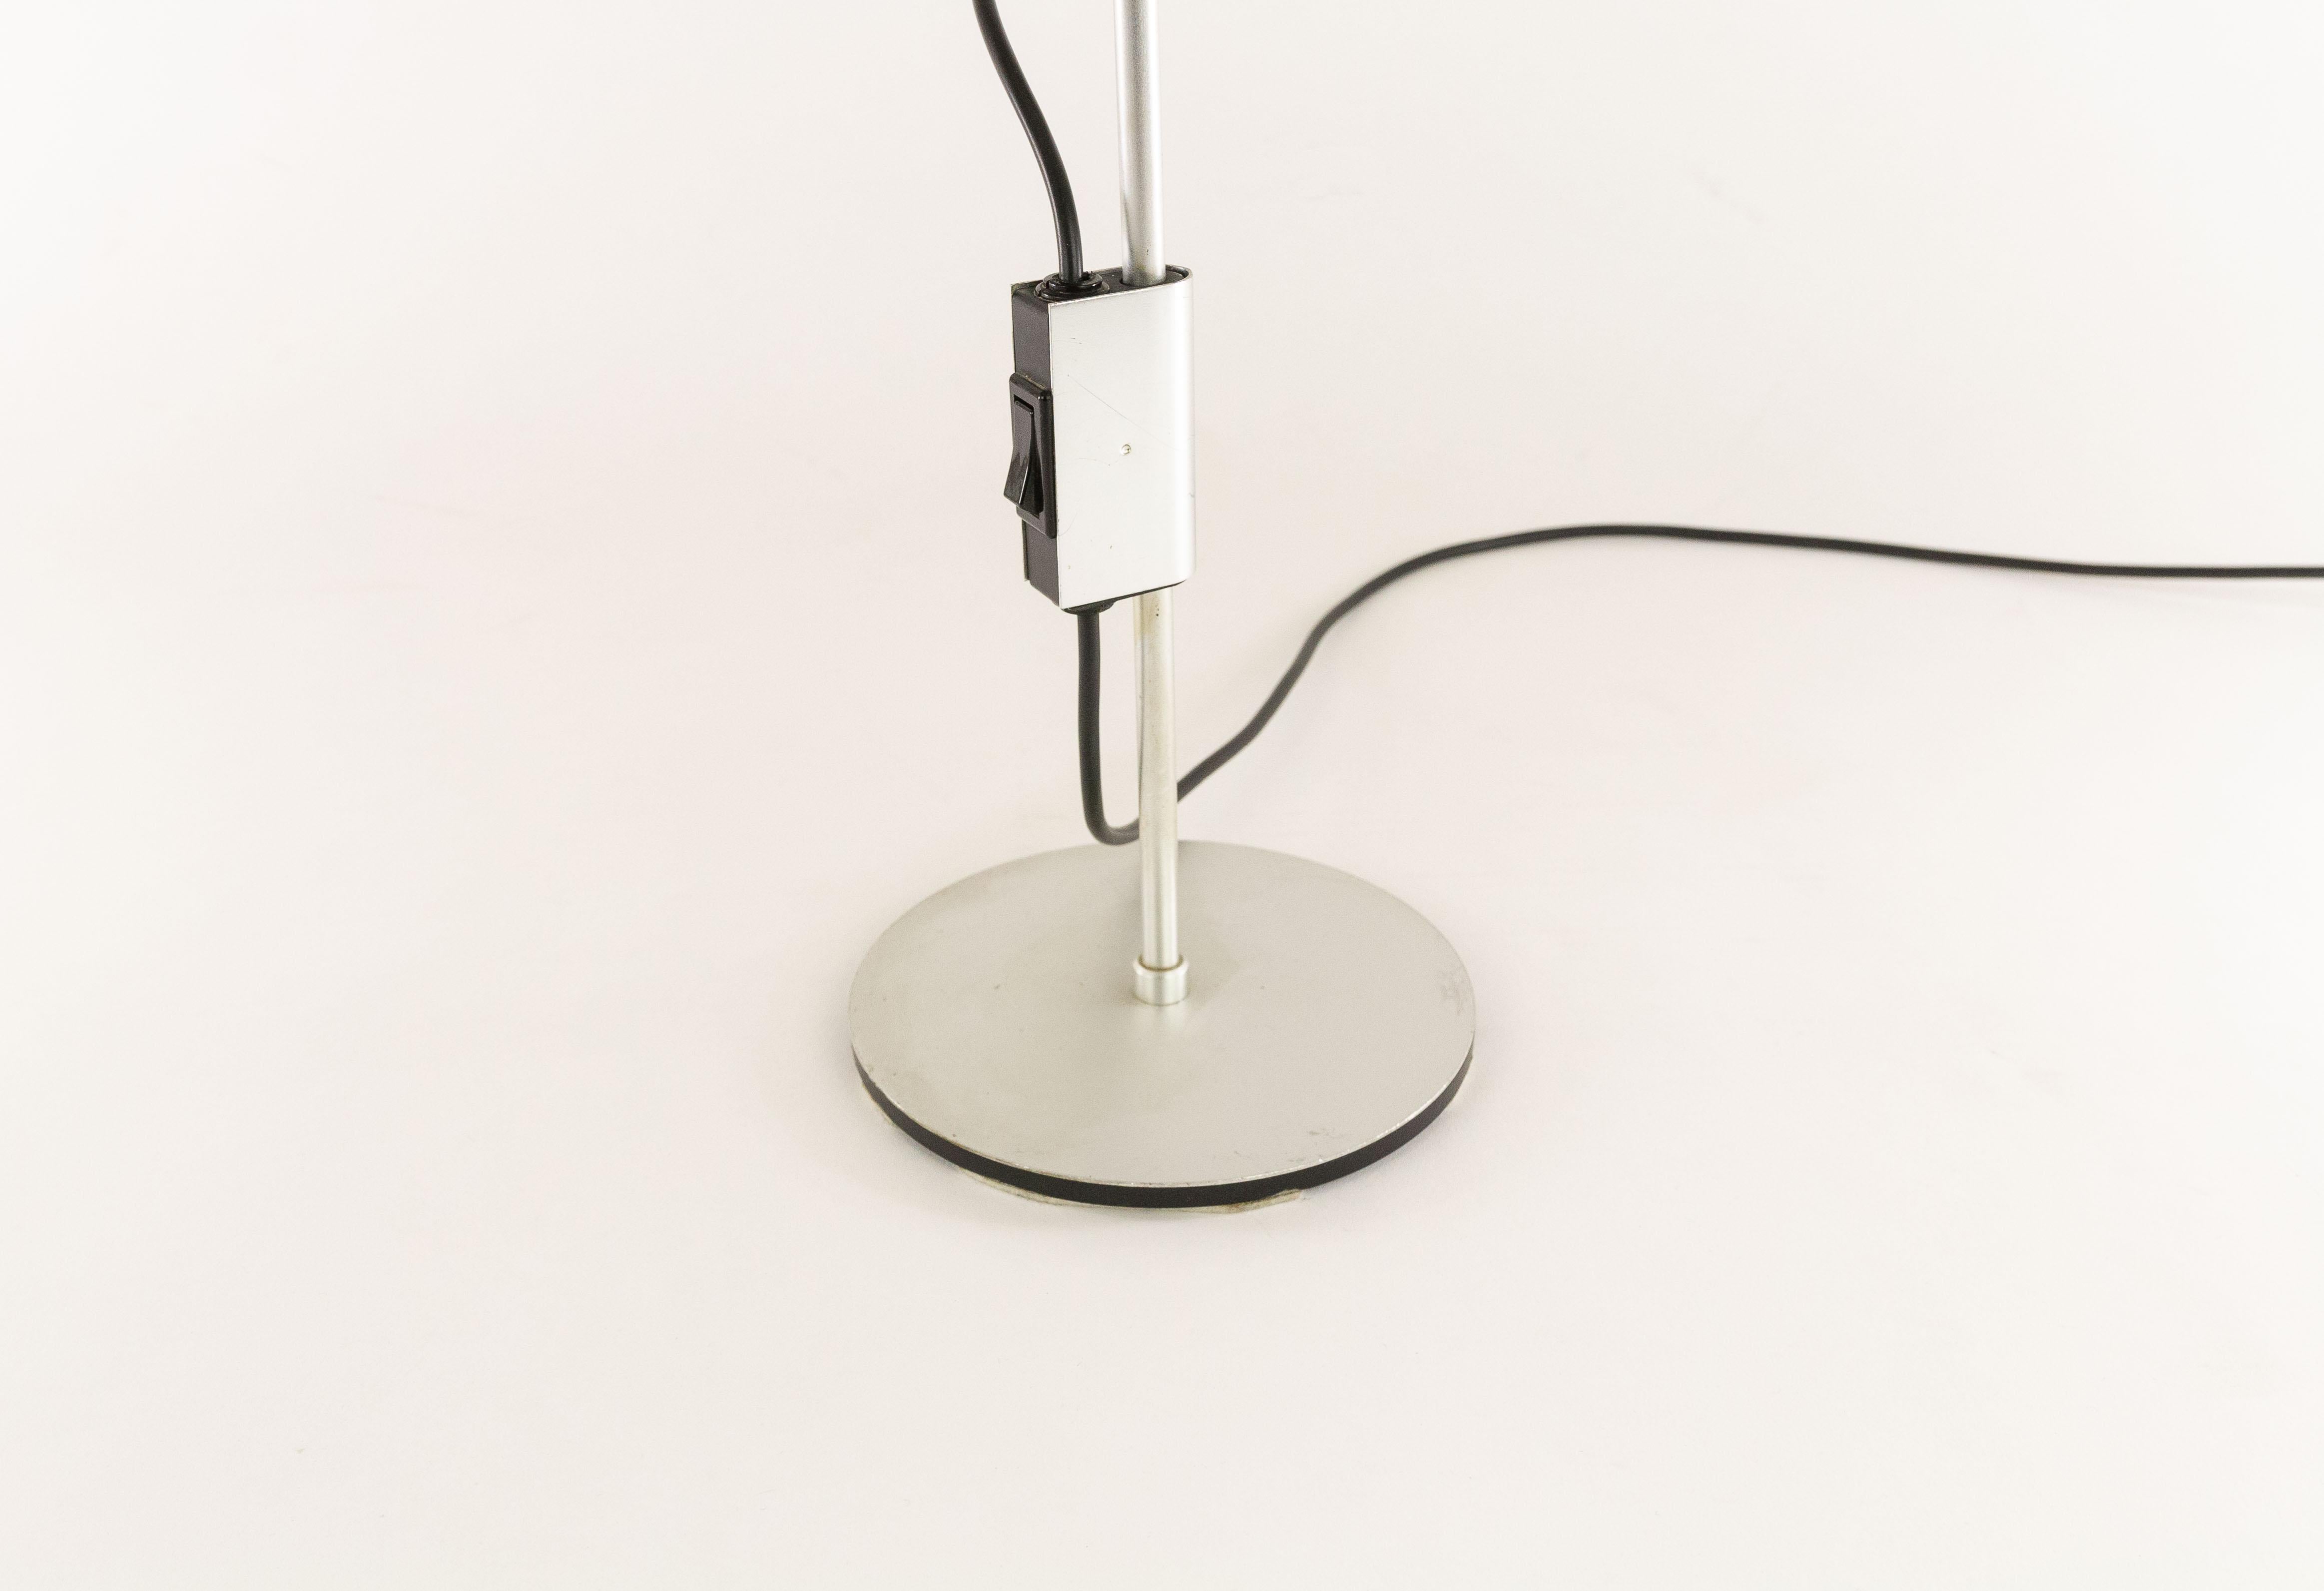 Metal Aluminum Table Lamp by Ronald Homes for Conelight Limited, 1960s